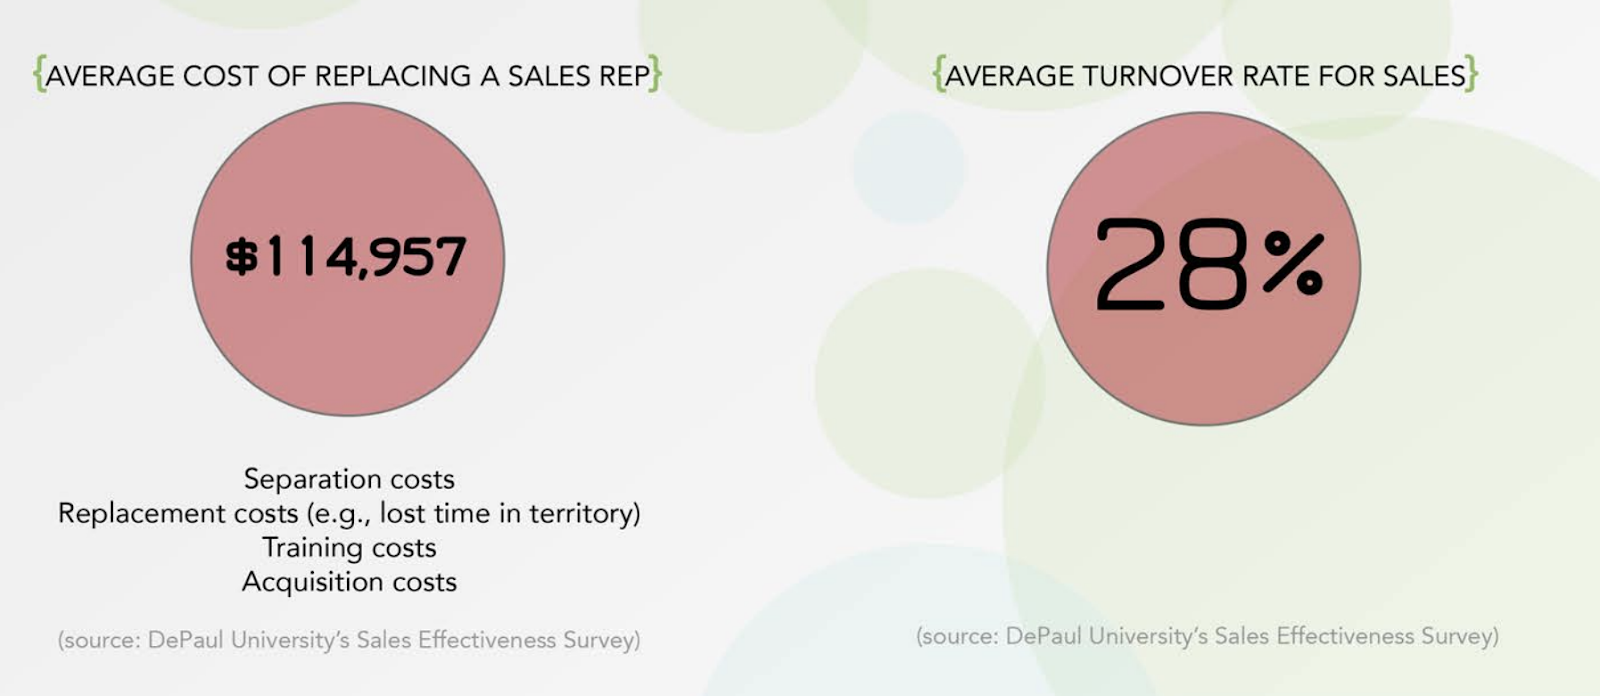 average cost of replacing a sales rep is six-figures.